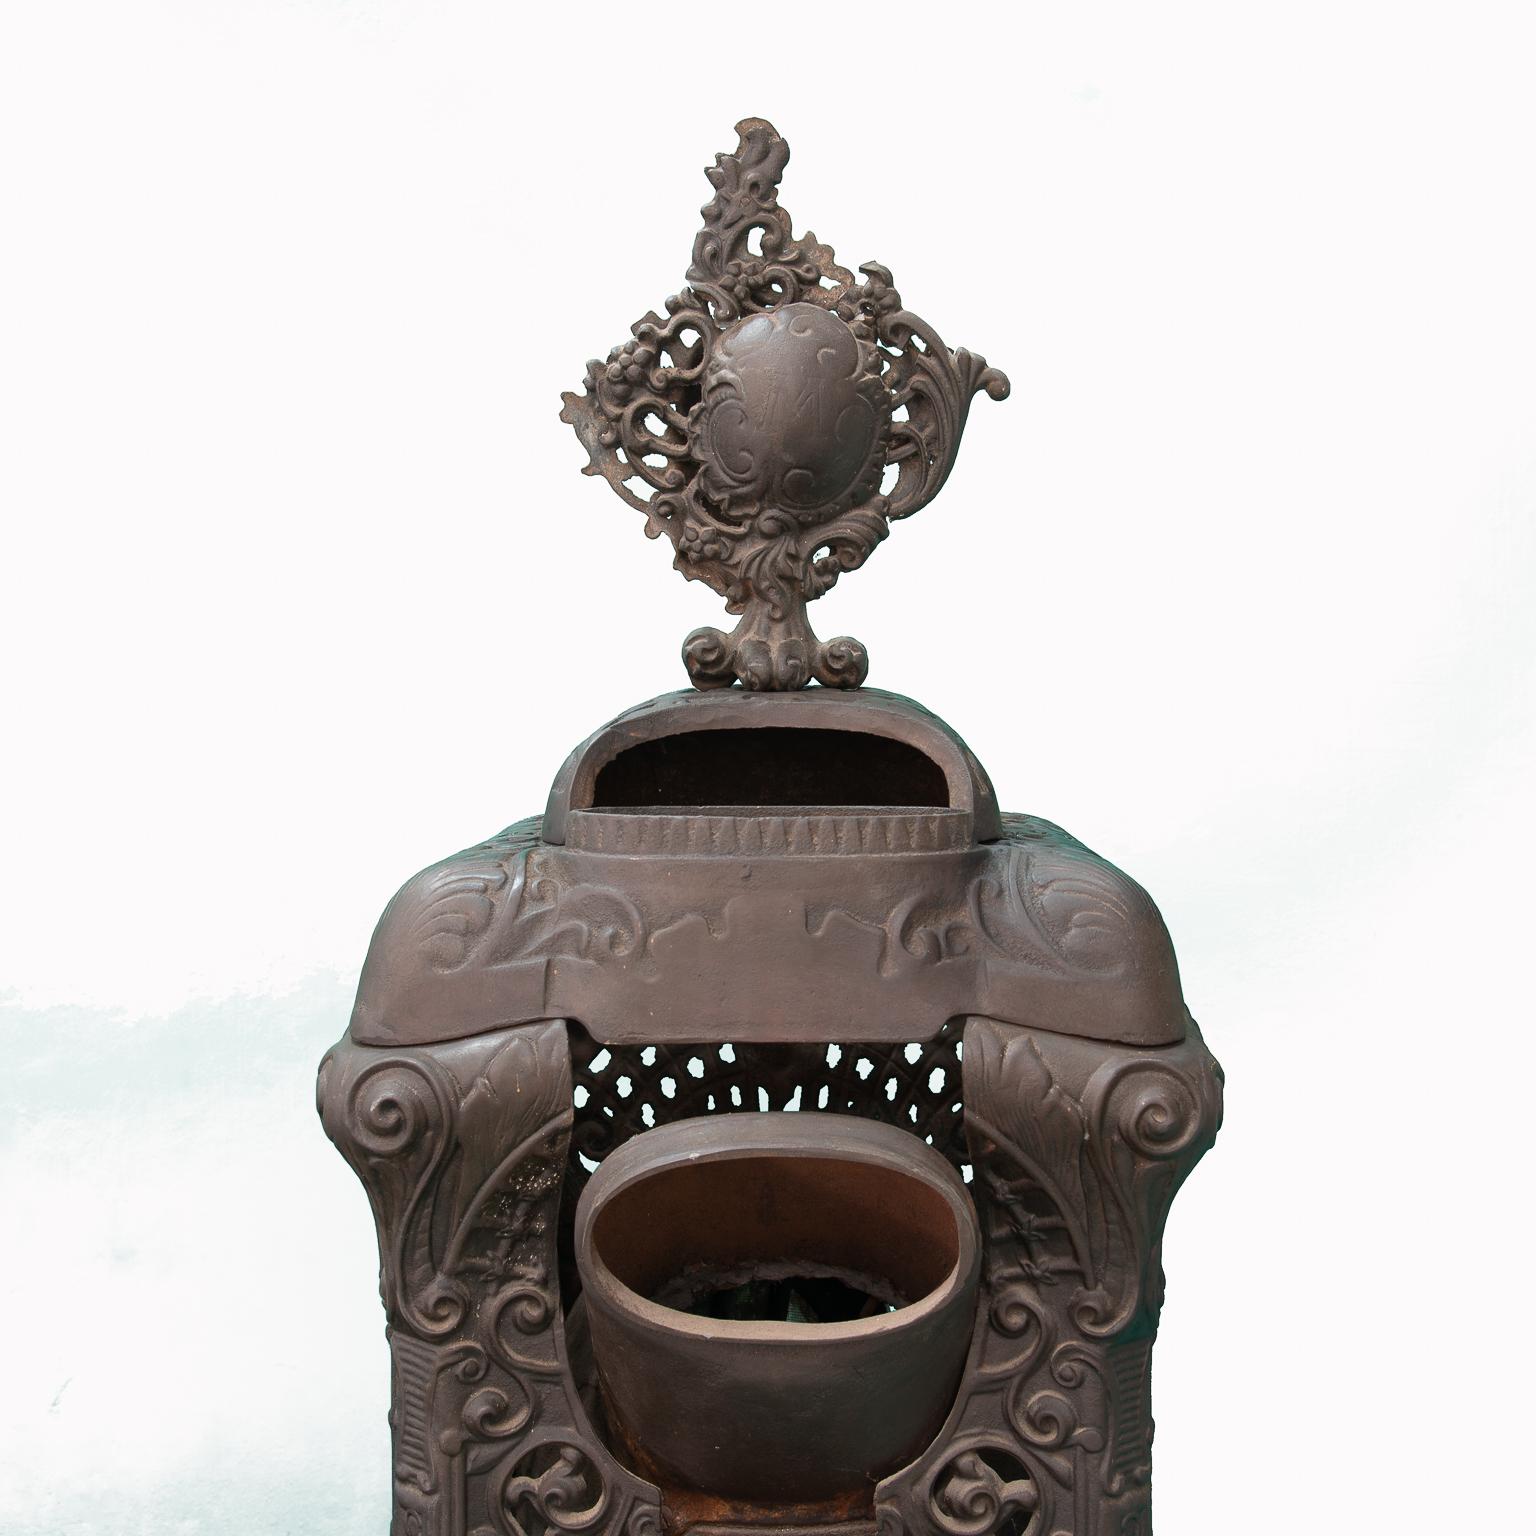 English Old Solid Iron Stove For Sale